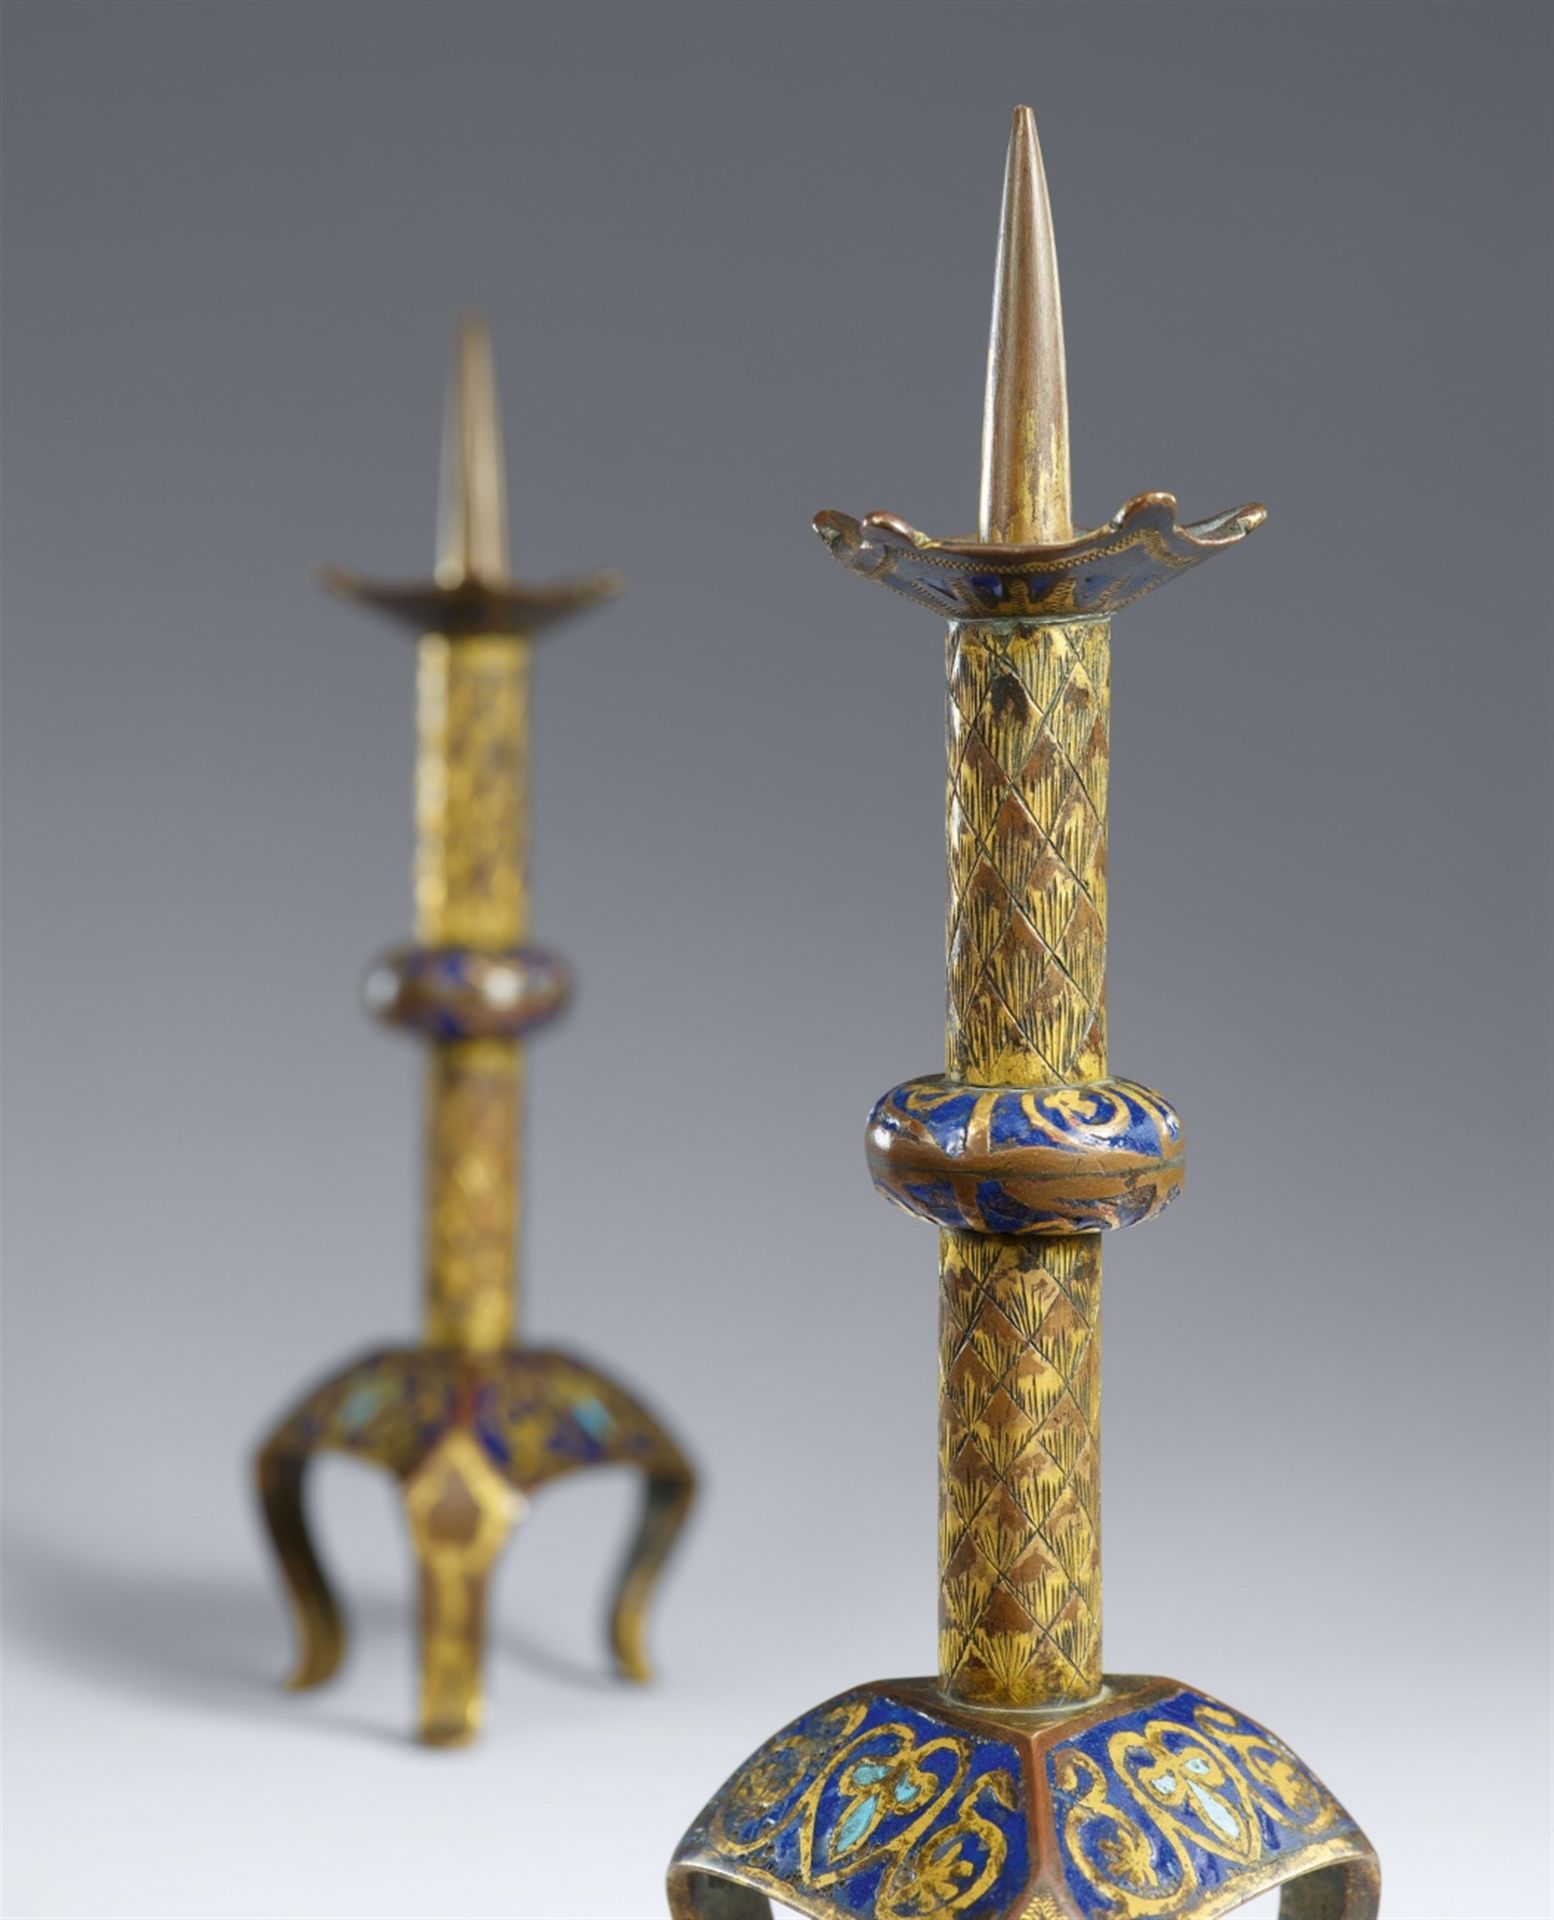 Two early 13th century Limoges enamel candlesticks - Image 2 of 2